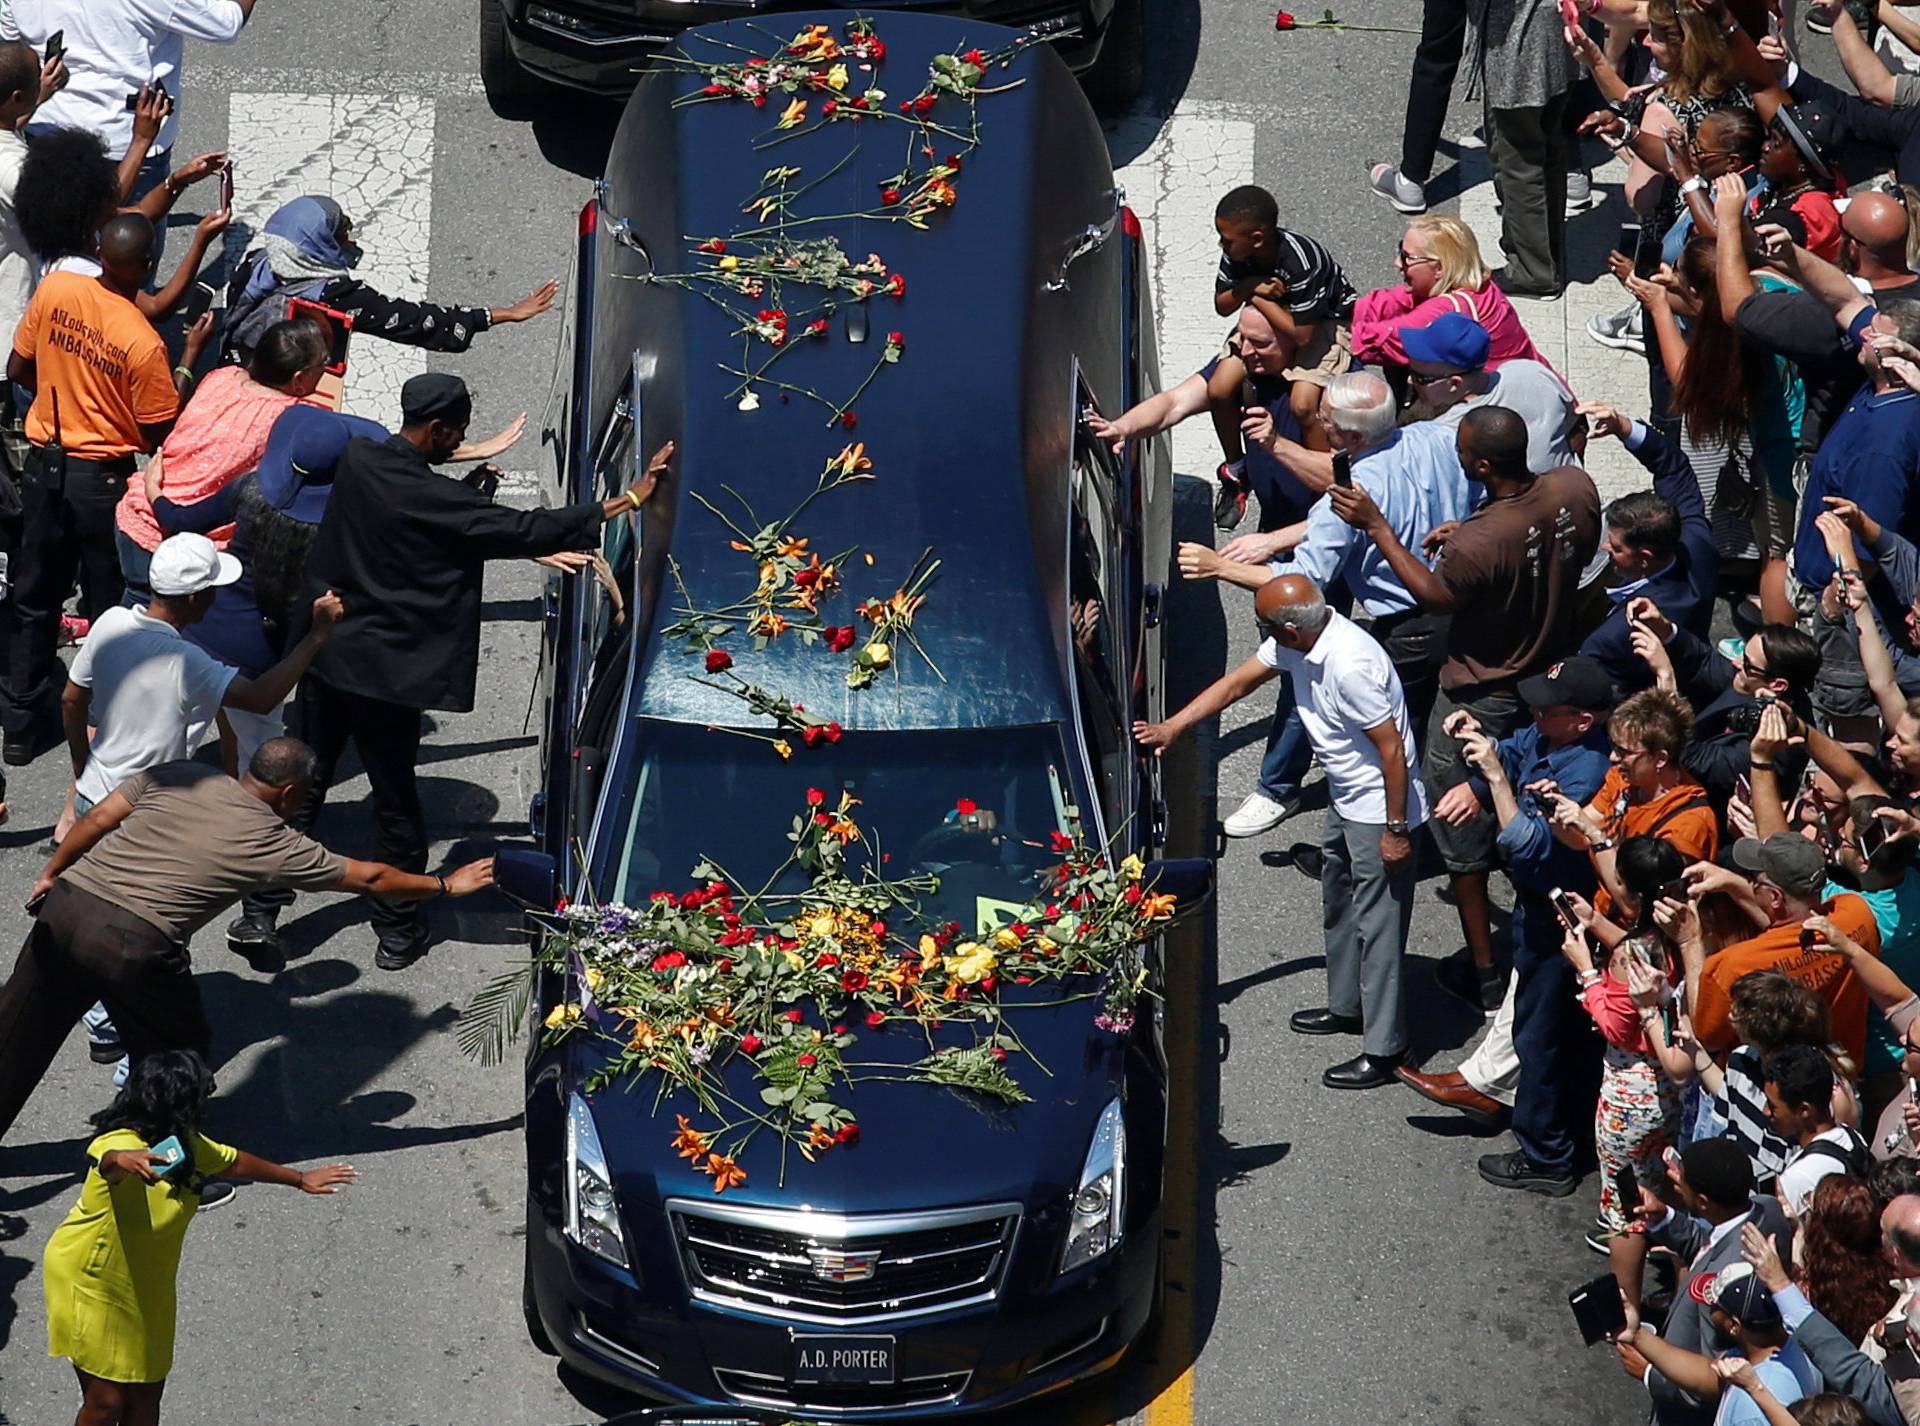 Well-wishers touch the hearse carrying the body of the late boxing champion Muhammad Ali during his funeral procession through Louisville, Kentucky